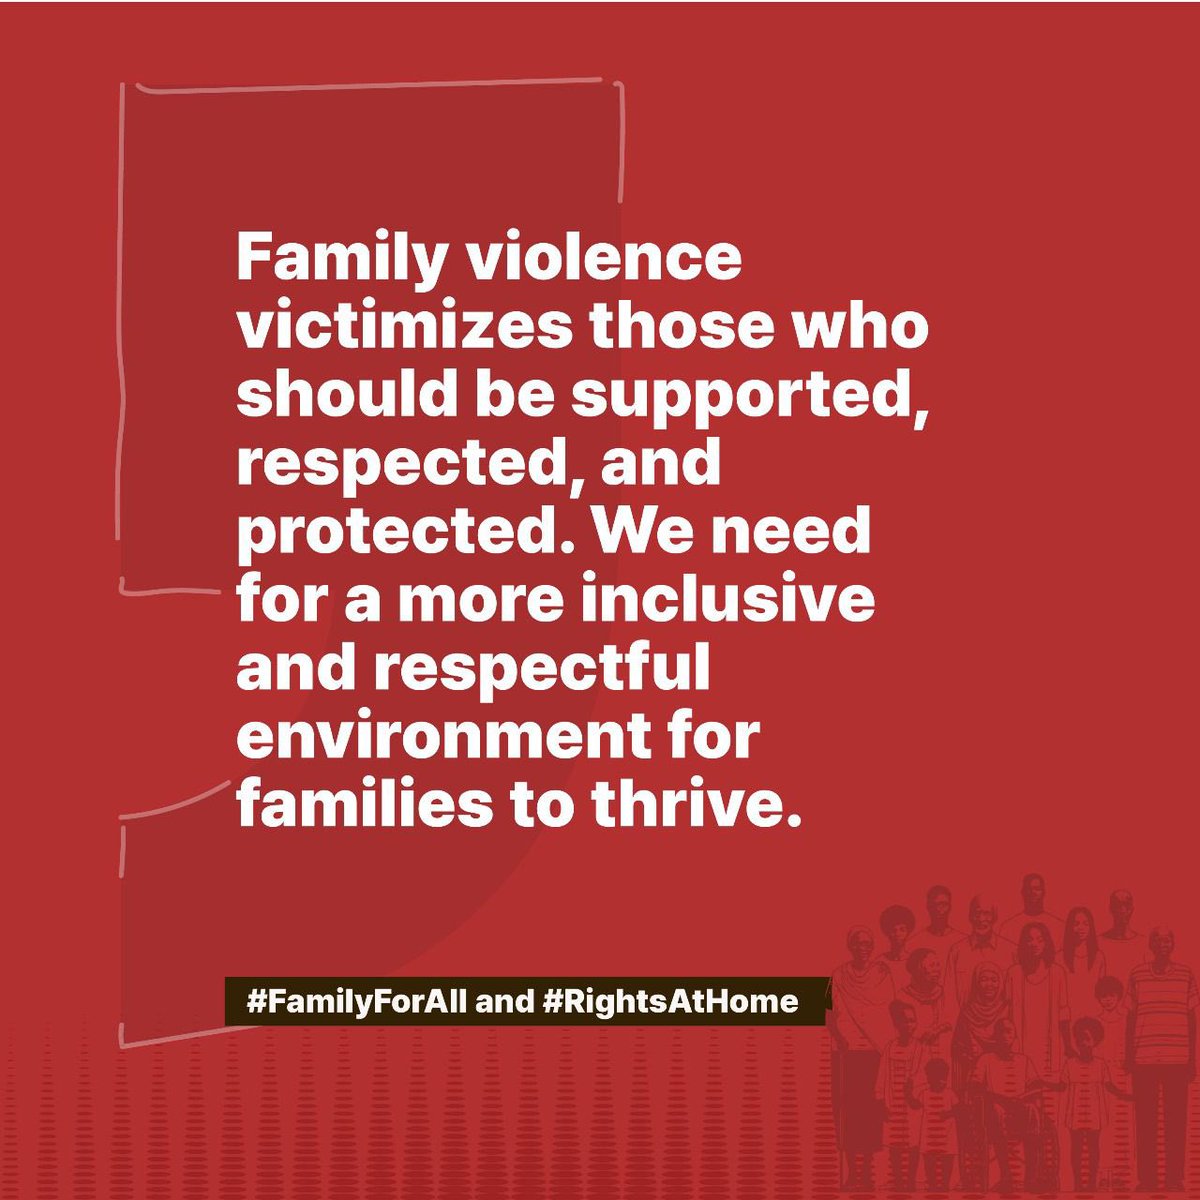 Let's challenge harmful gender stereotypes and promote healthy relationship dynamics within families. #FamilyForAll #RightsAtHome